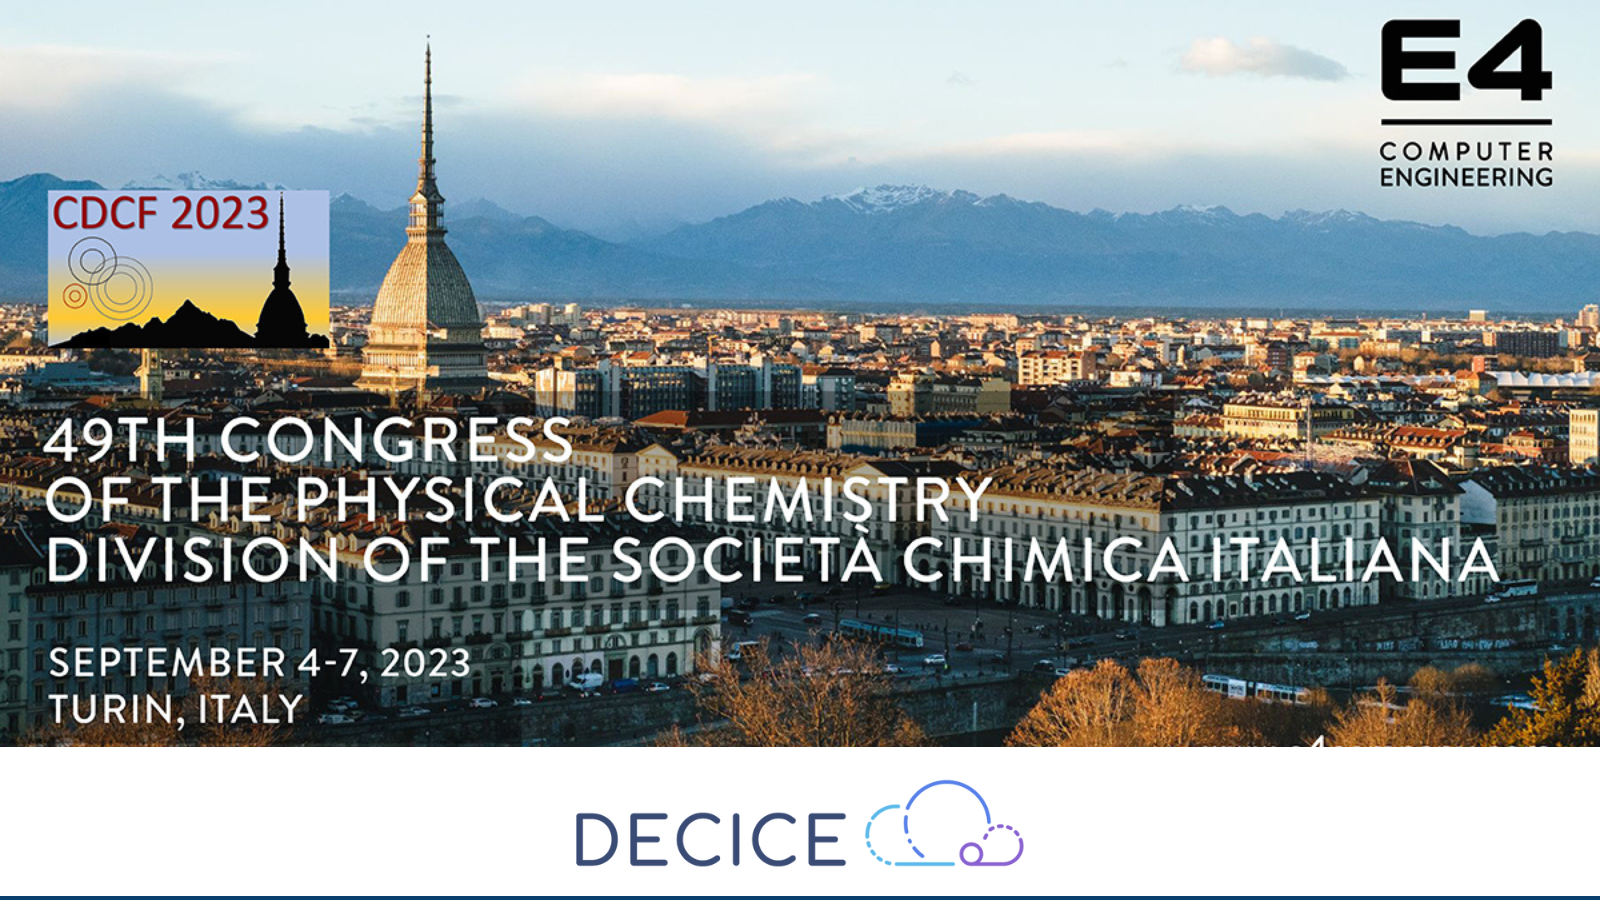 Presentation of DECICE Poster on the National Congress on Physical Chemistry 2023